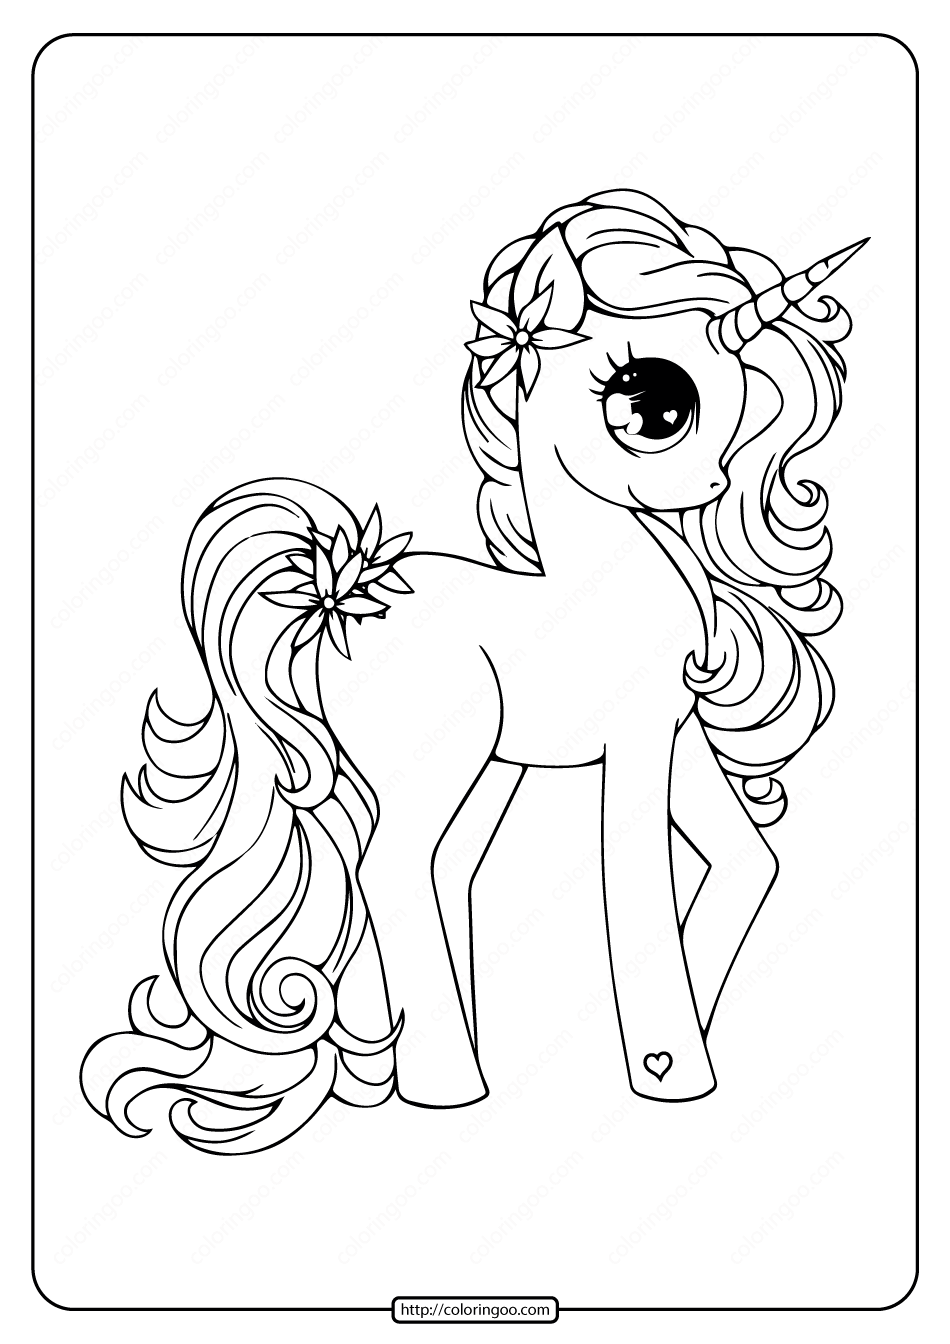 Free Unicorn Coloring Pages Atilaswing